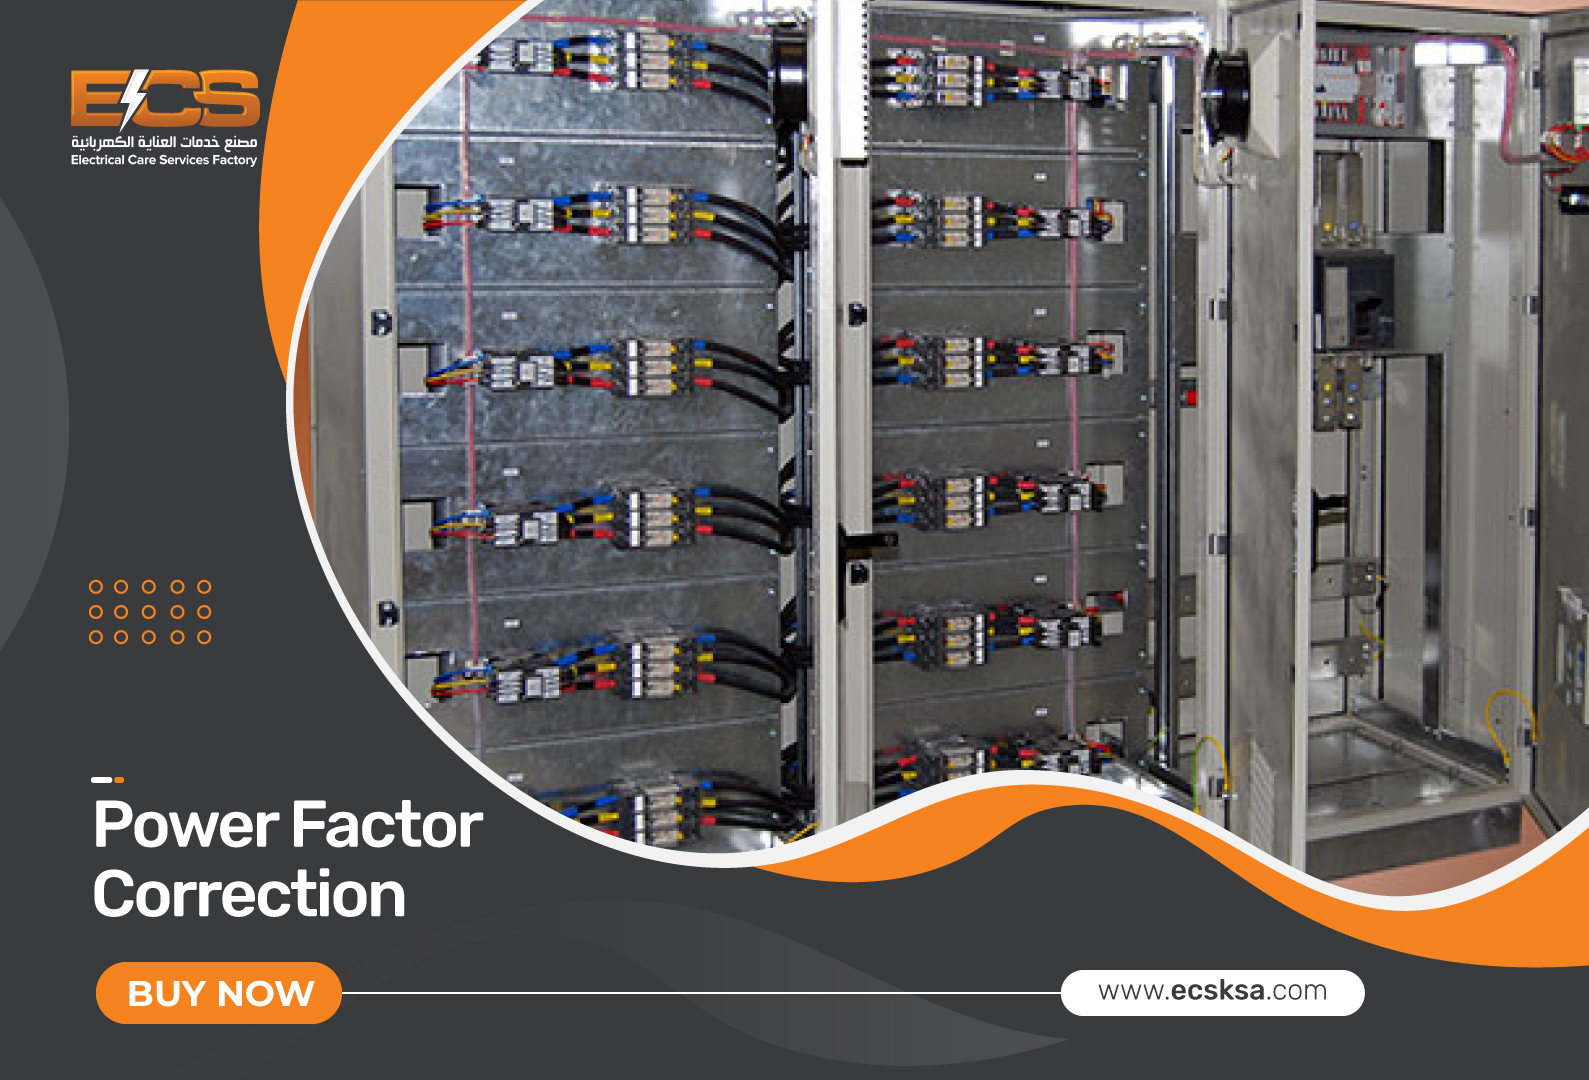 Types of Capacitors Bank